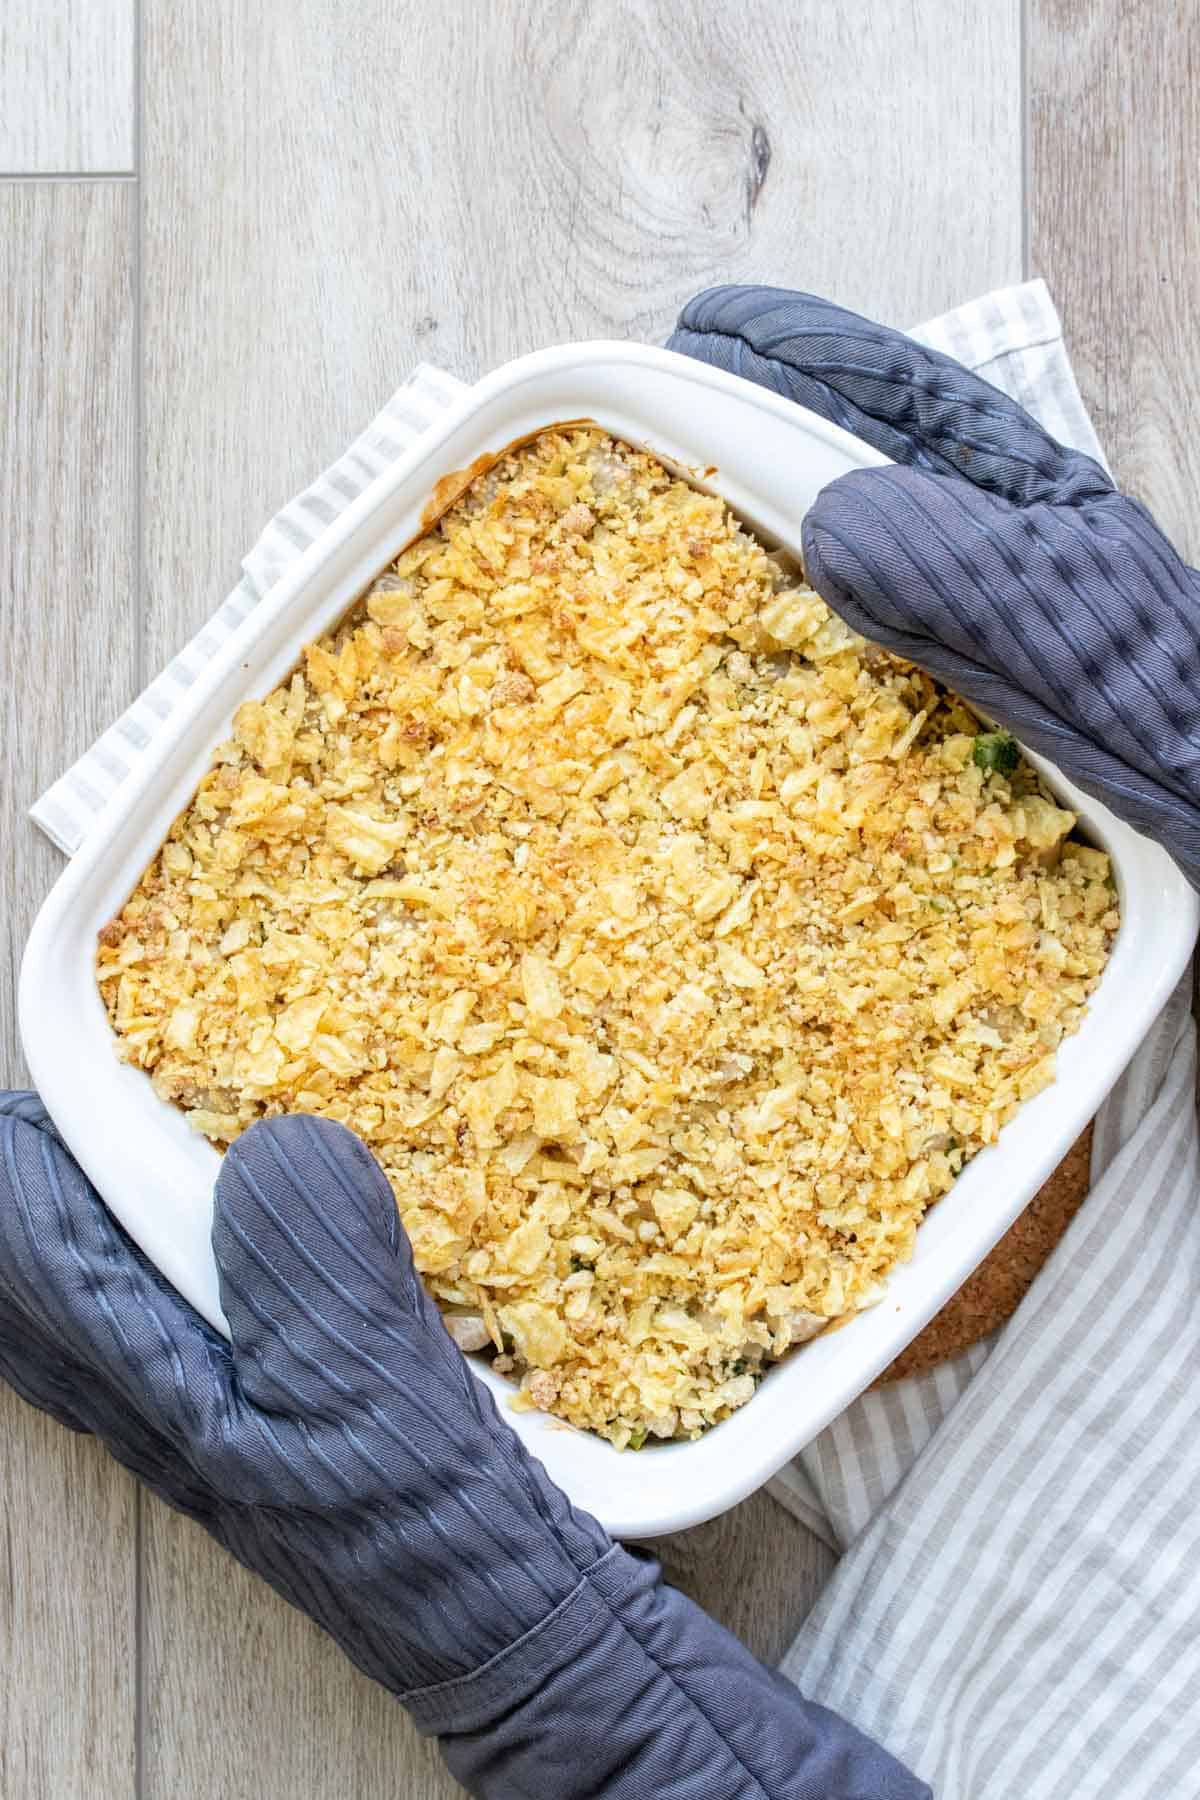 Two hands in oven mitts holding a white baking dish topped with potato chips